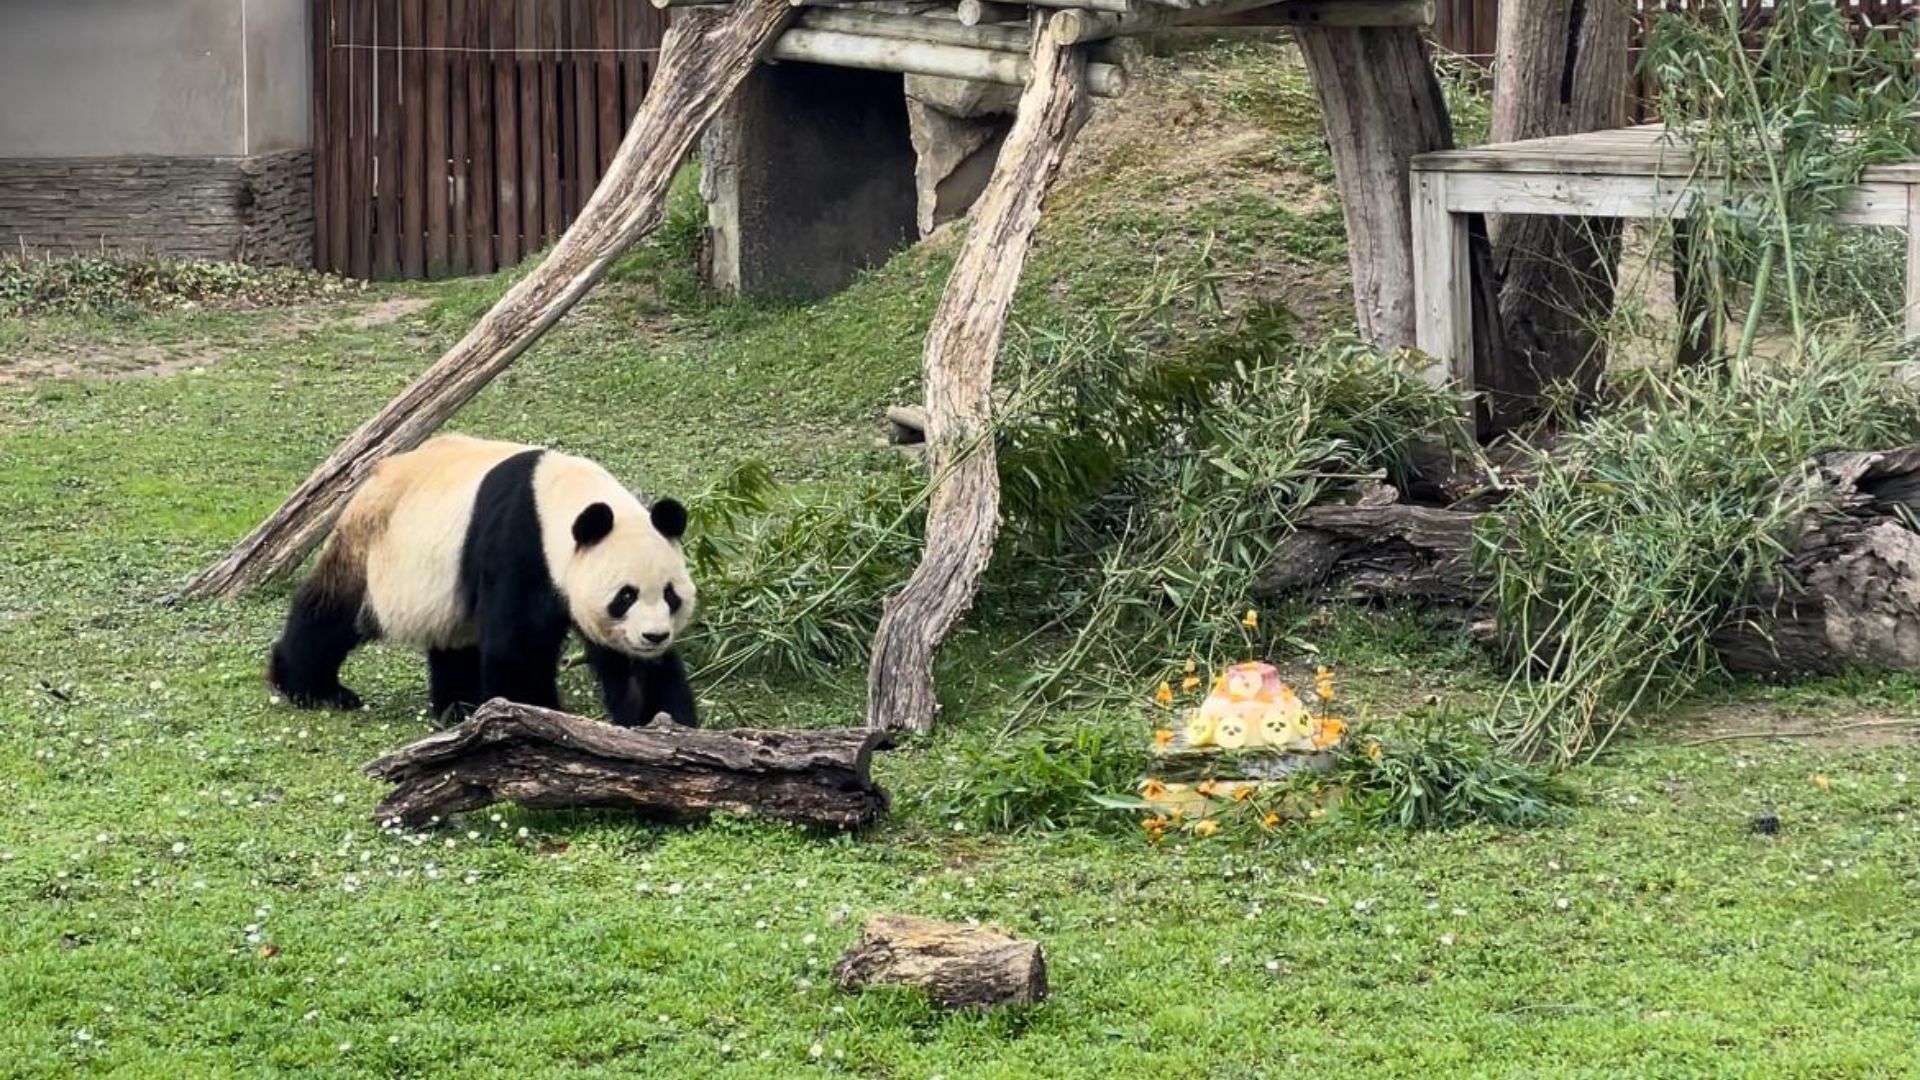 The pandas will be sadly missed by zoo staff. /Ken Browne/CGTN